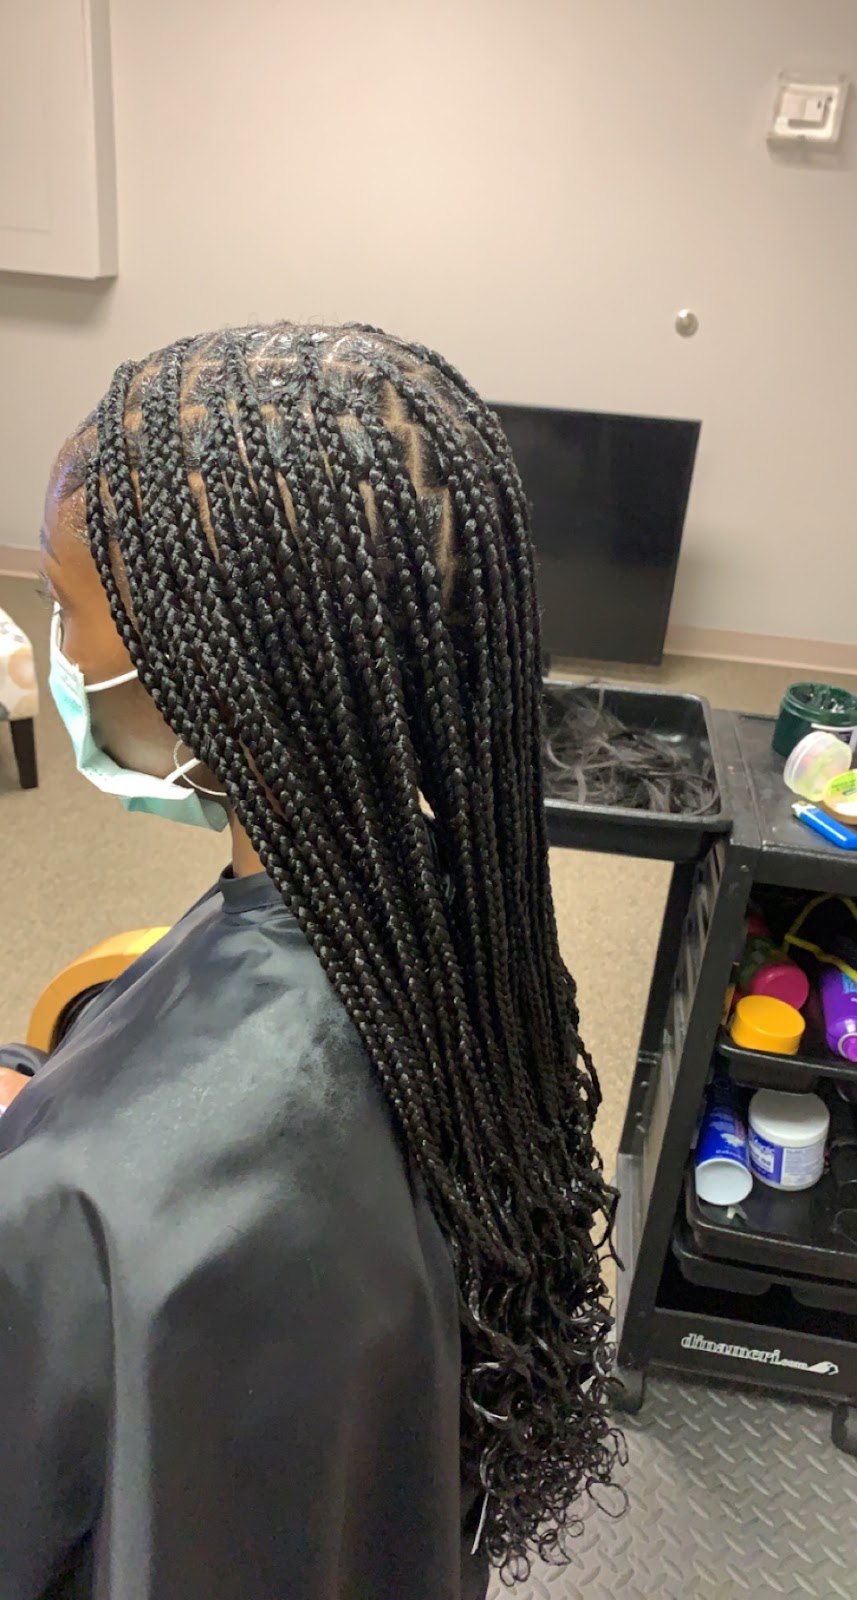 Devons Hair Braiding and Protective Styles | 3 Neptune Rd Suite A24, Poughkeepsie, NY 12601 | Phone: (845) 891-8567